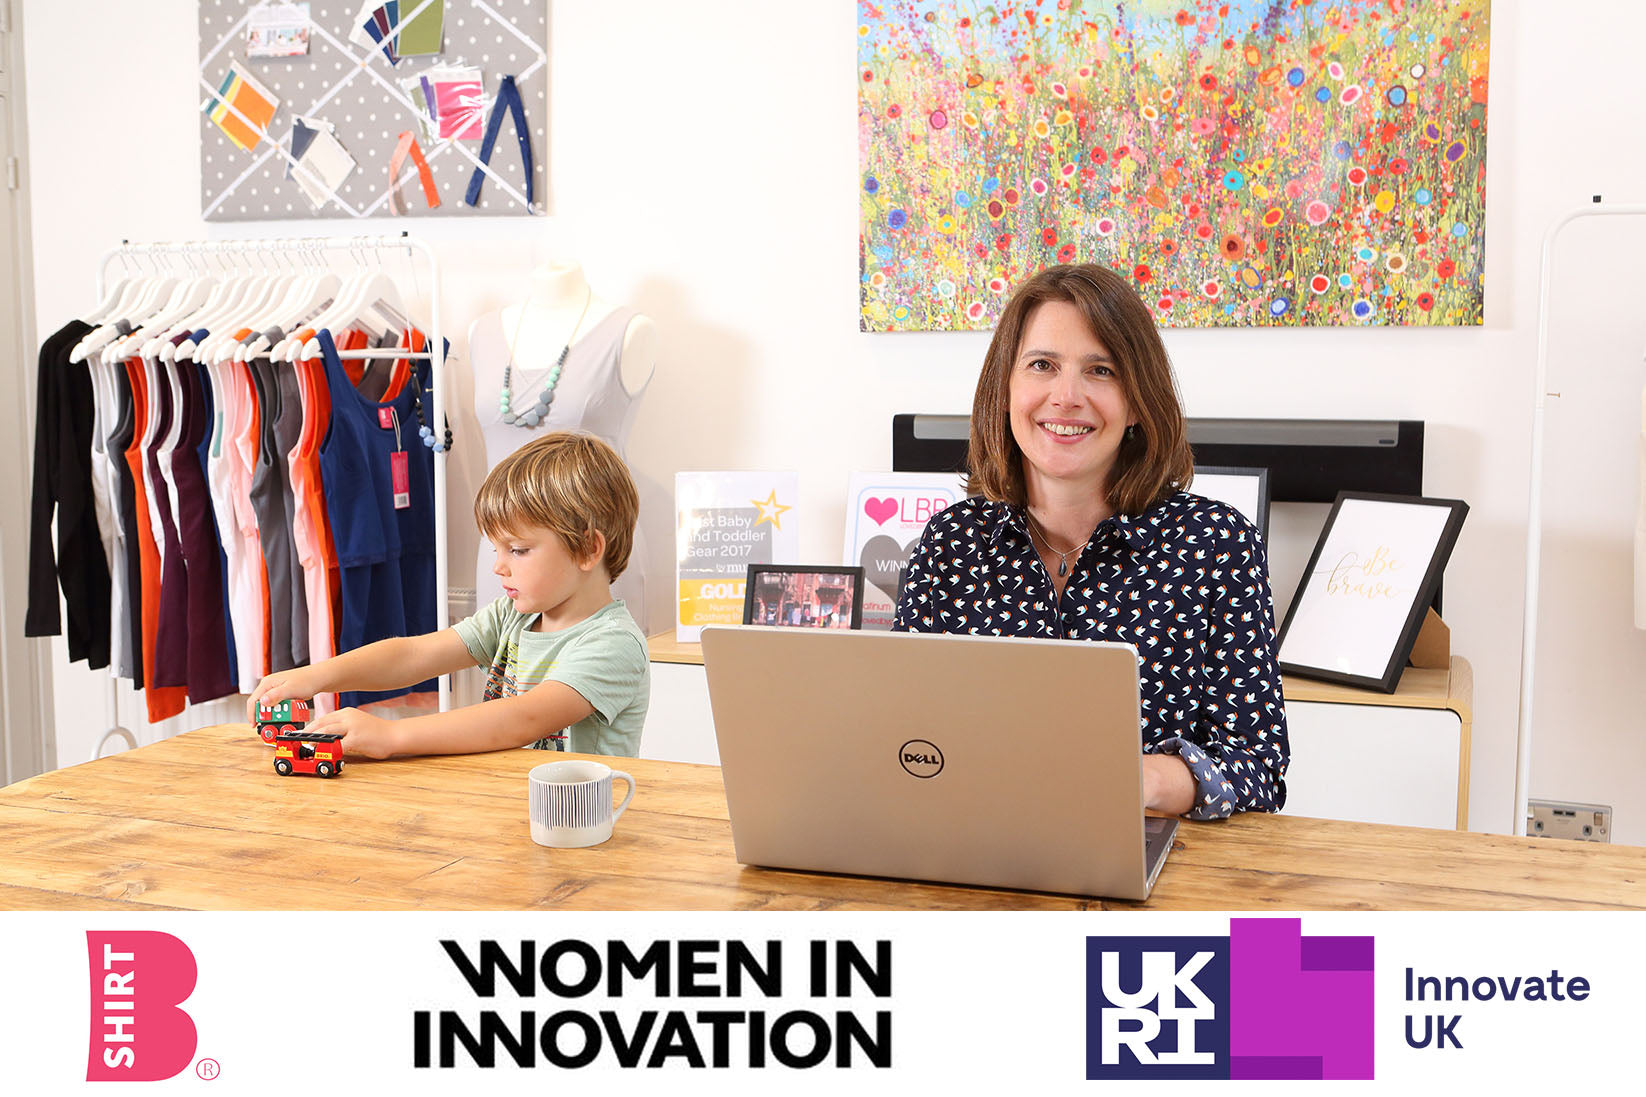 Bcorp Certified brand The Bshirt wins prestigious Women in Innovation award from Innovate UK for Circular Fashion innovation